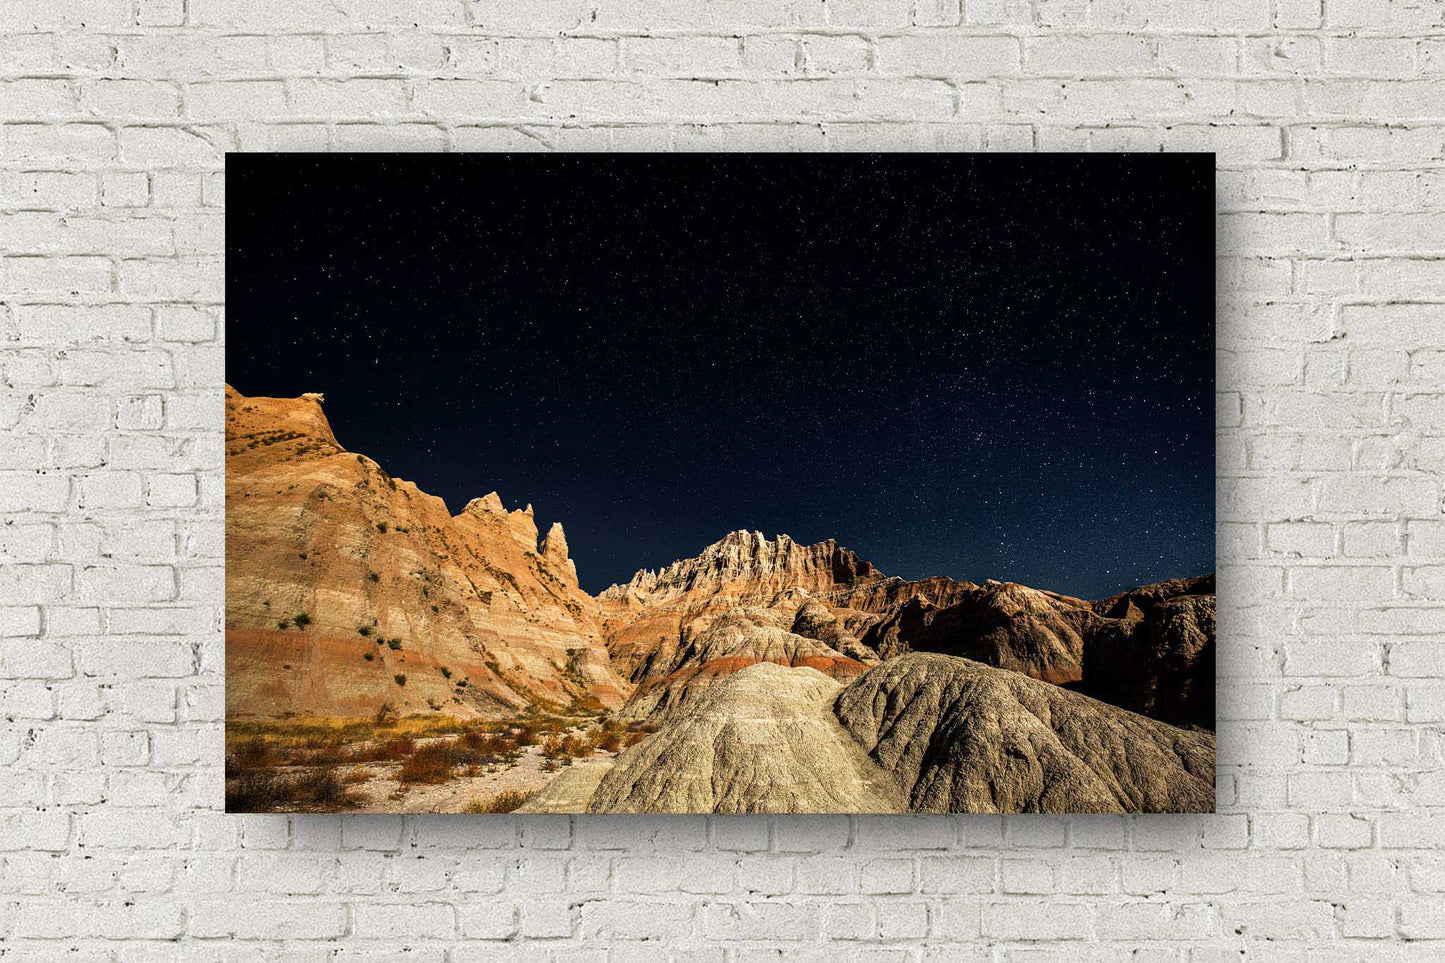 Great Plains metal print of a starry night sky over pinnacles in Badlands National Park, South Dakota by Sean Ramsey of Southern Plains Photography.